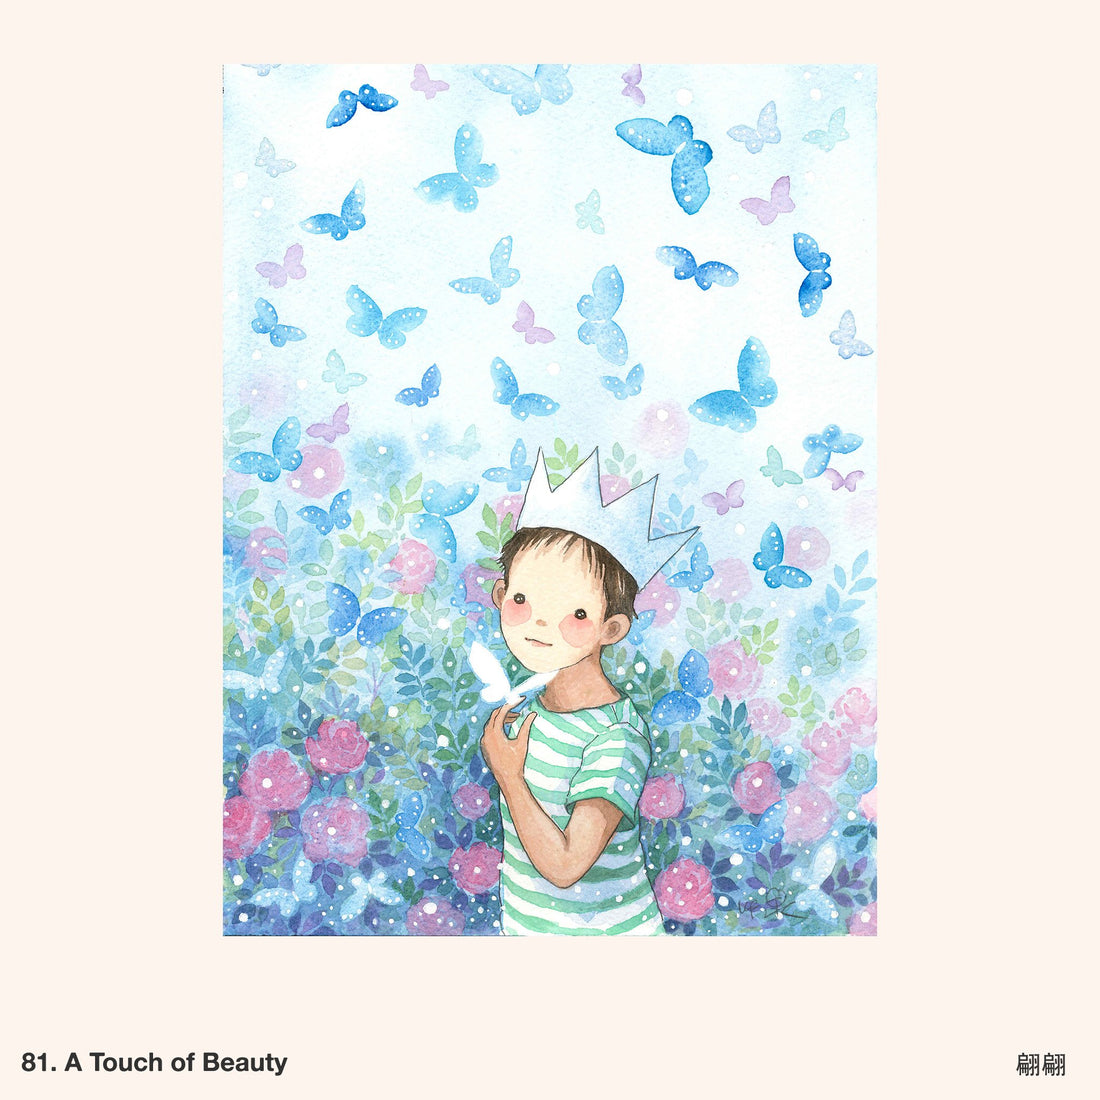 81. A Touch of Beauty Artwork